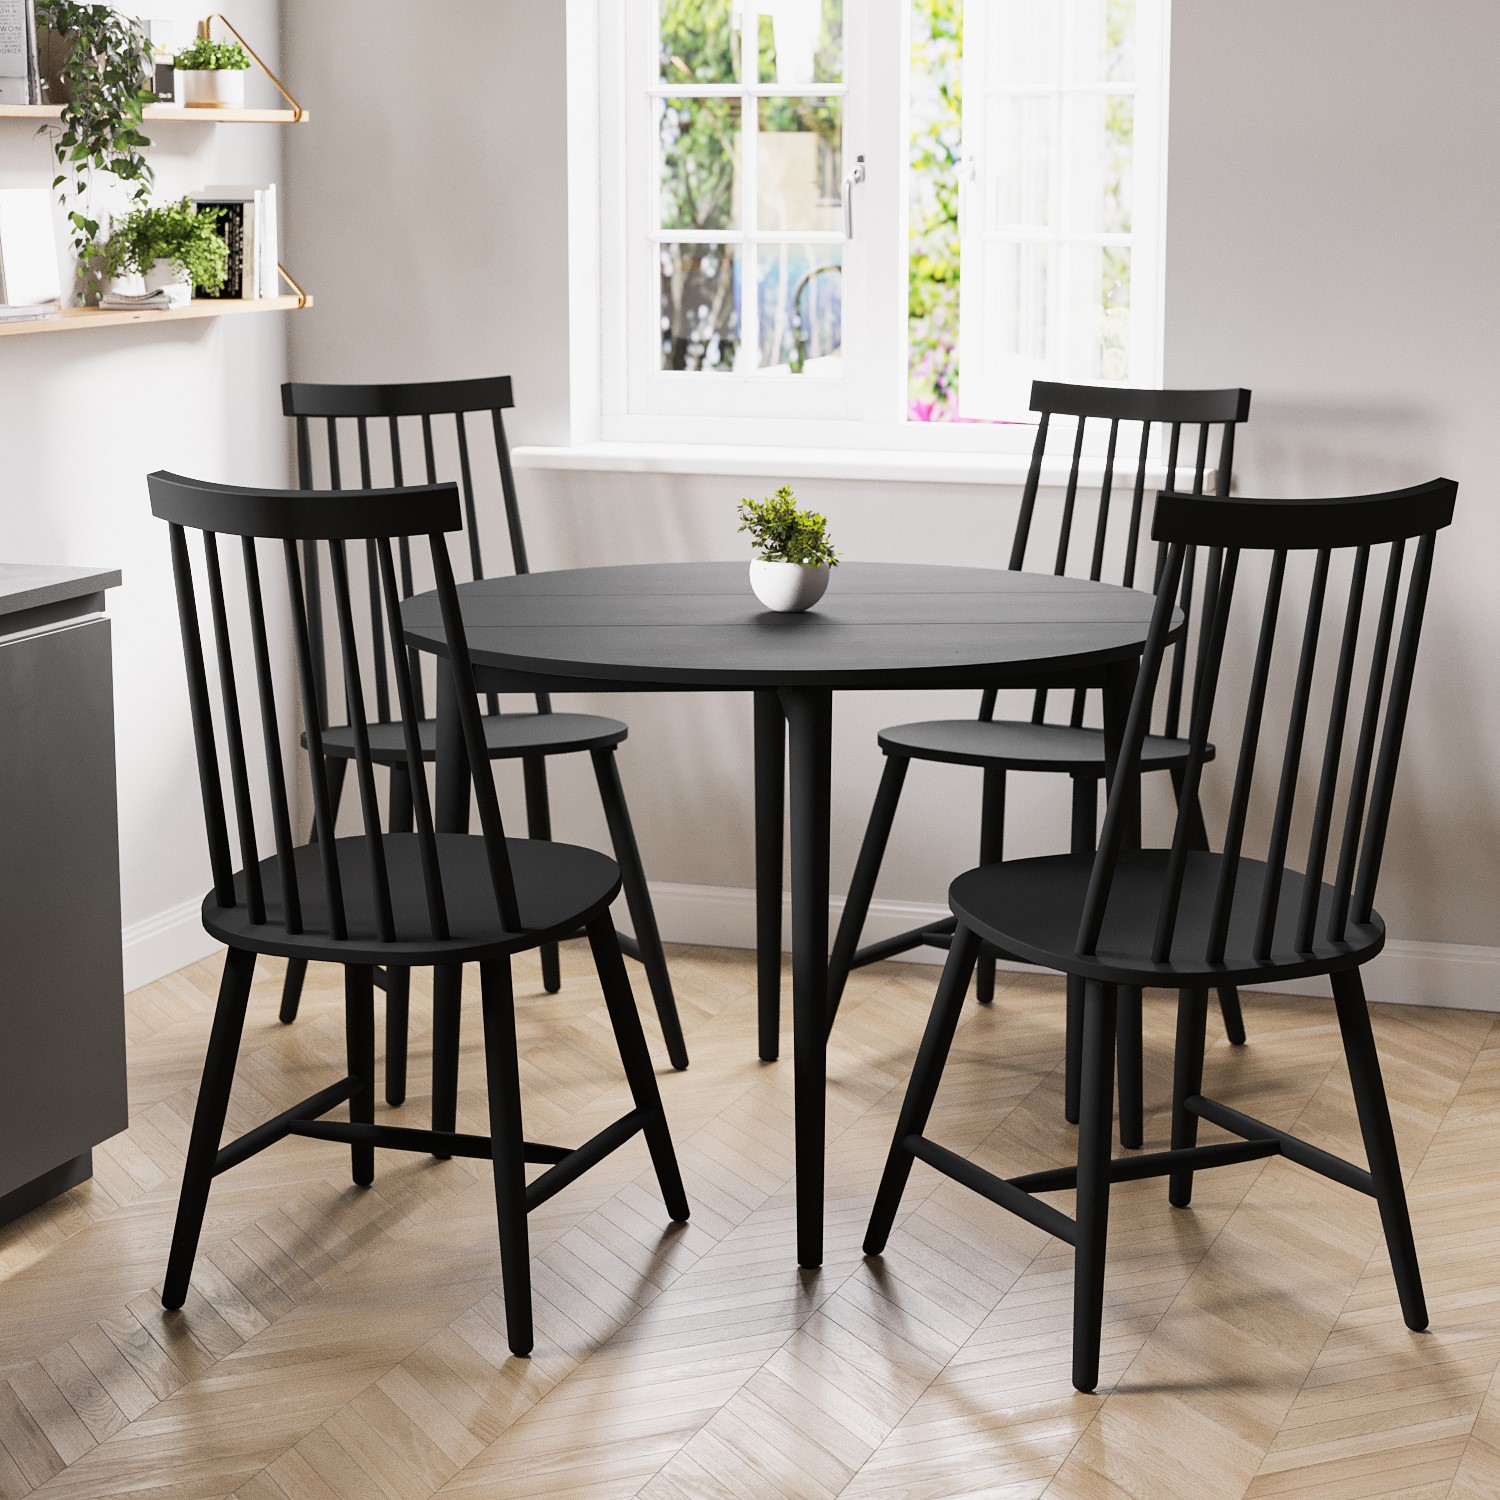 Photo of Round black folding drop leaf dining table with 4 wooden spindle dining chairs - rudy